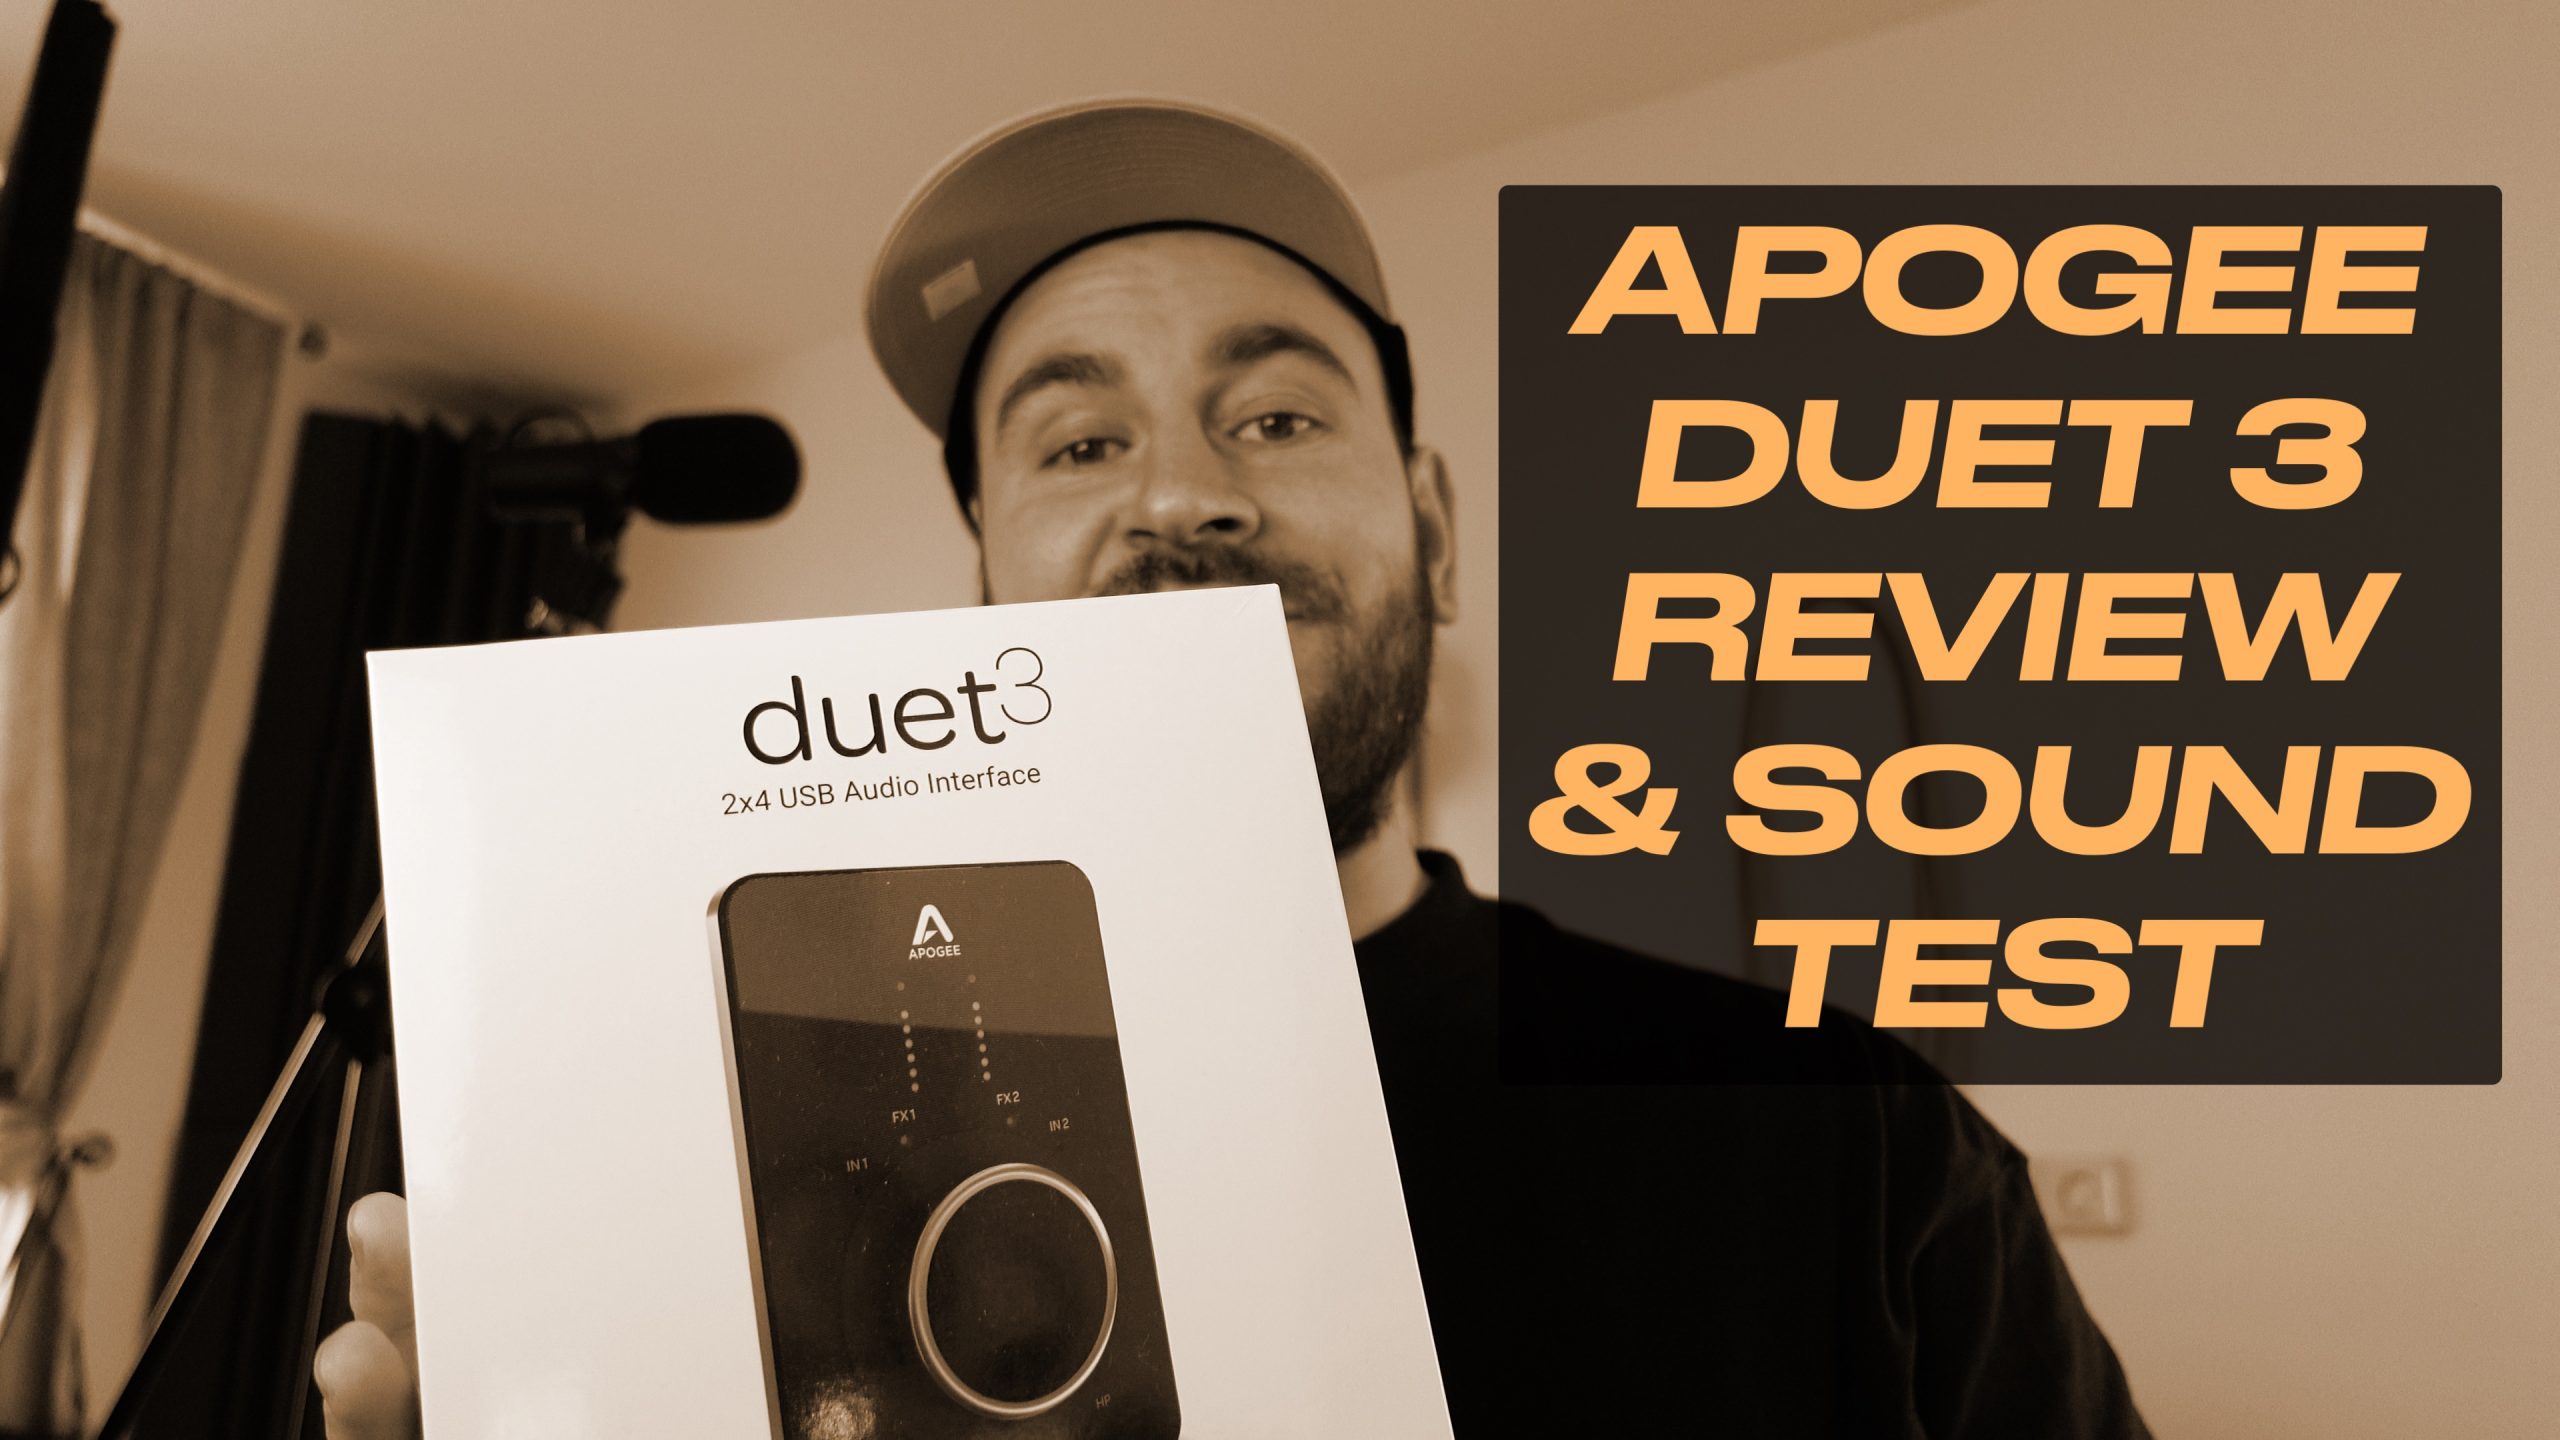 Apogee Duet 3 Review